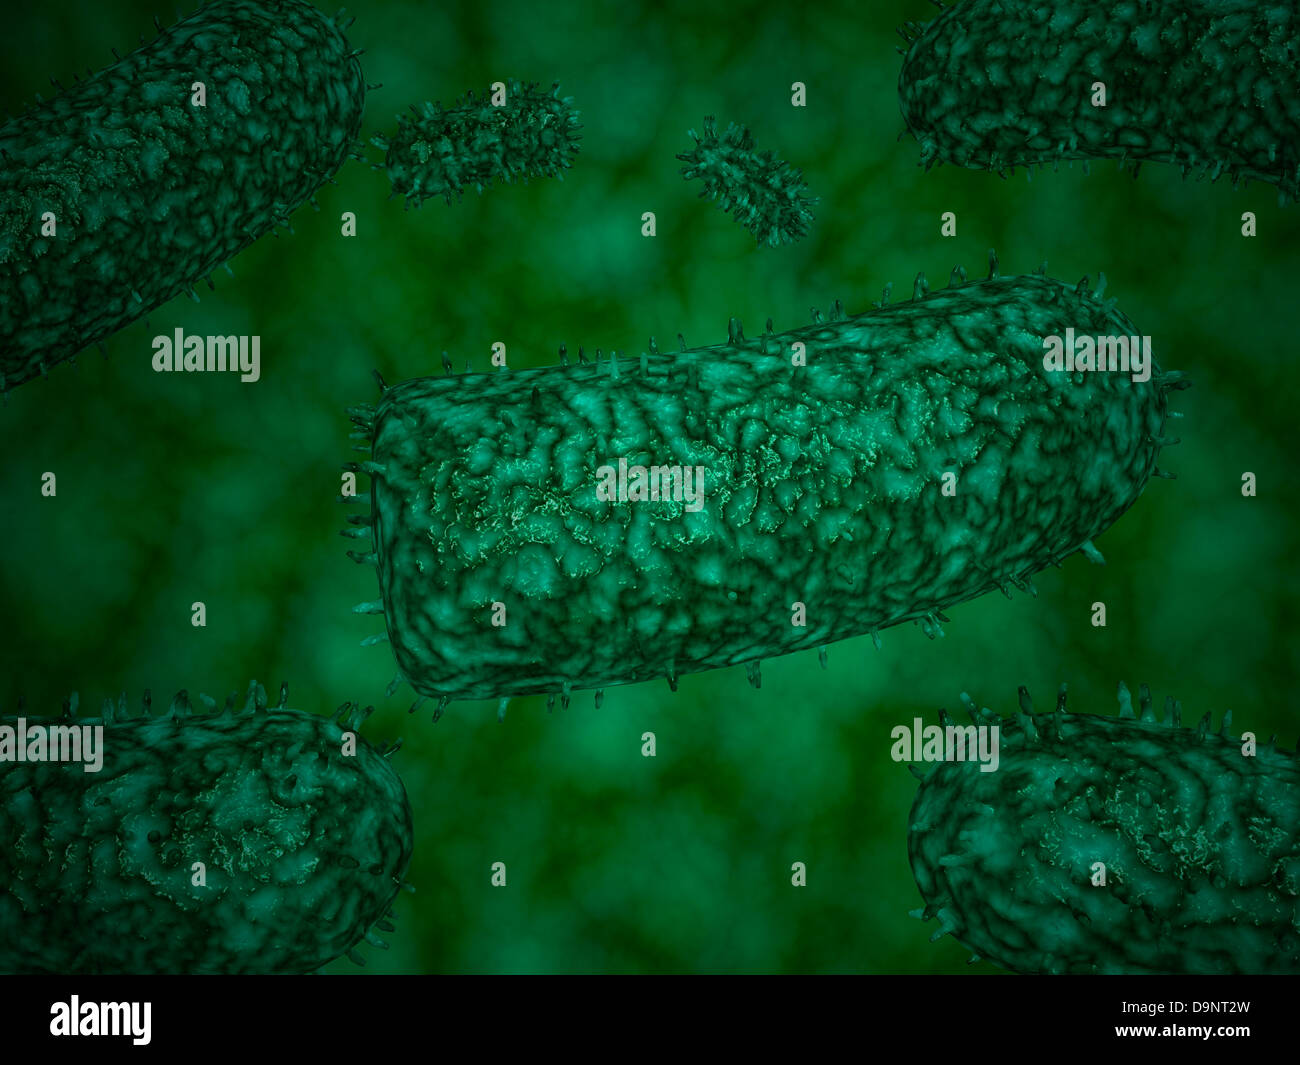 Stylized rabies virus particles, the cause of the viral neuroinvasive disease acute encephalitis. Stock Photo